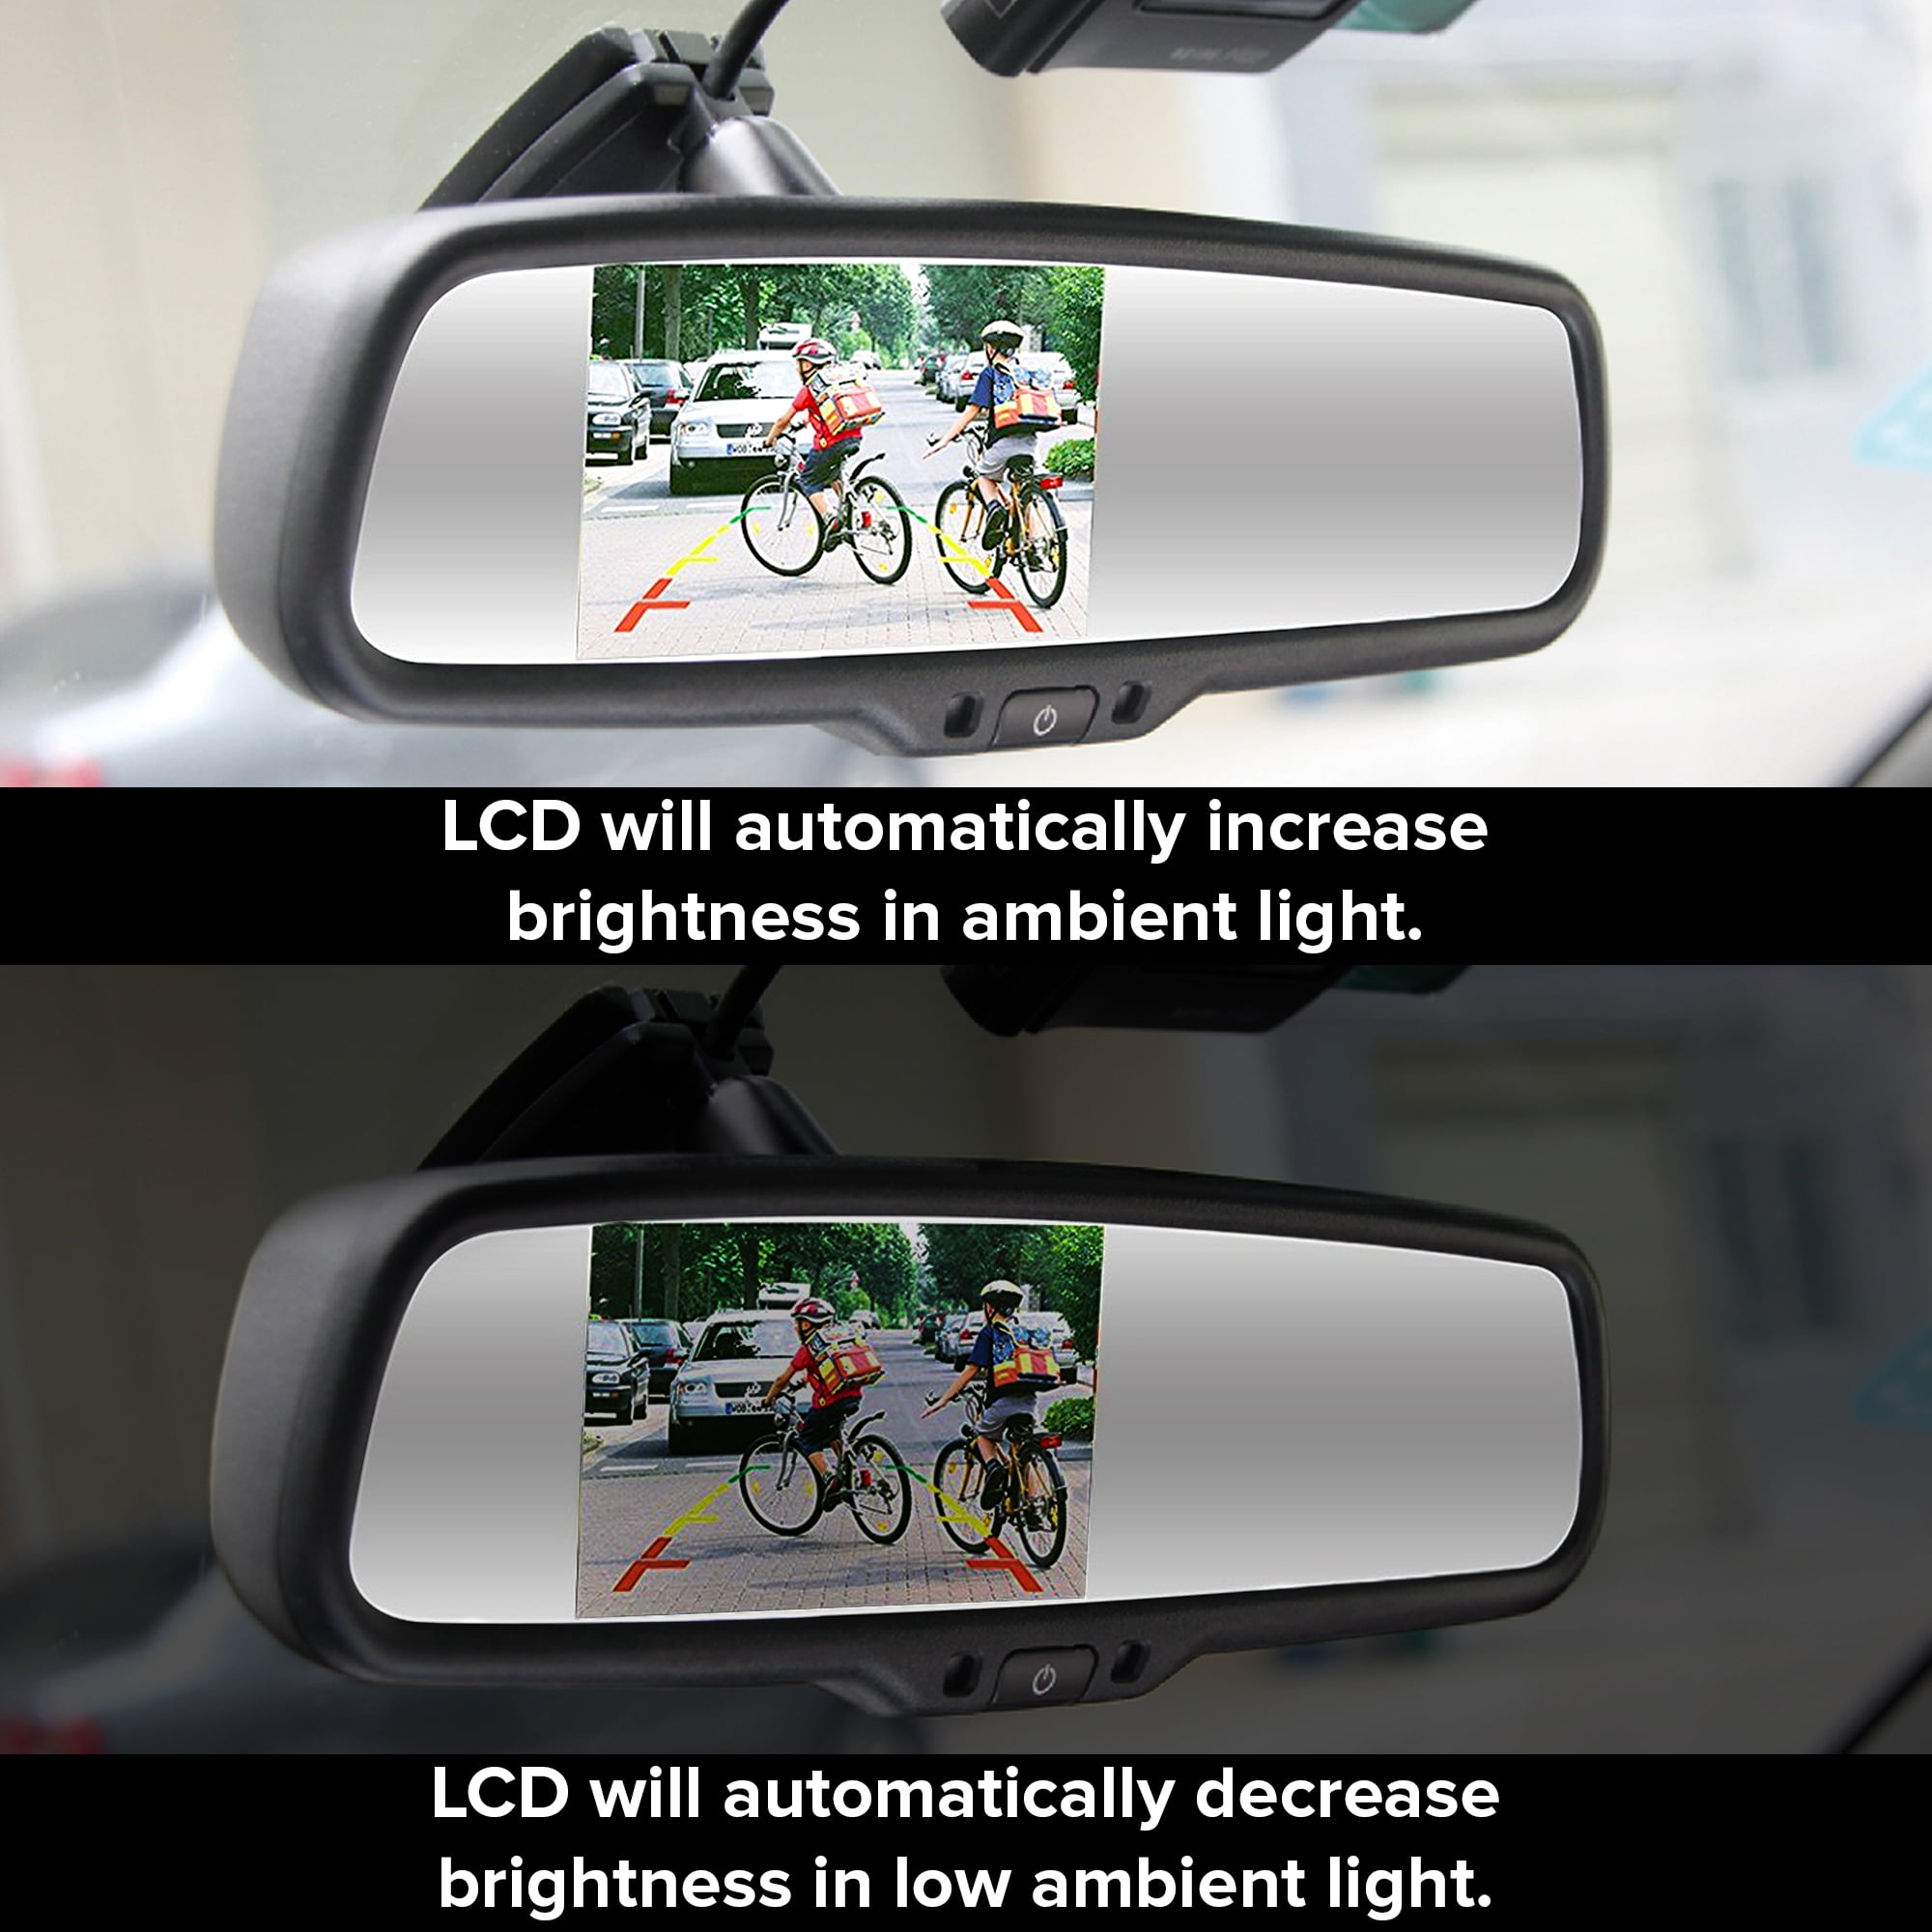 Master Tailgaters OEM Rear View Mirror with 4.3" Auto Bright LCD Auto Dimming